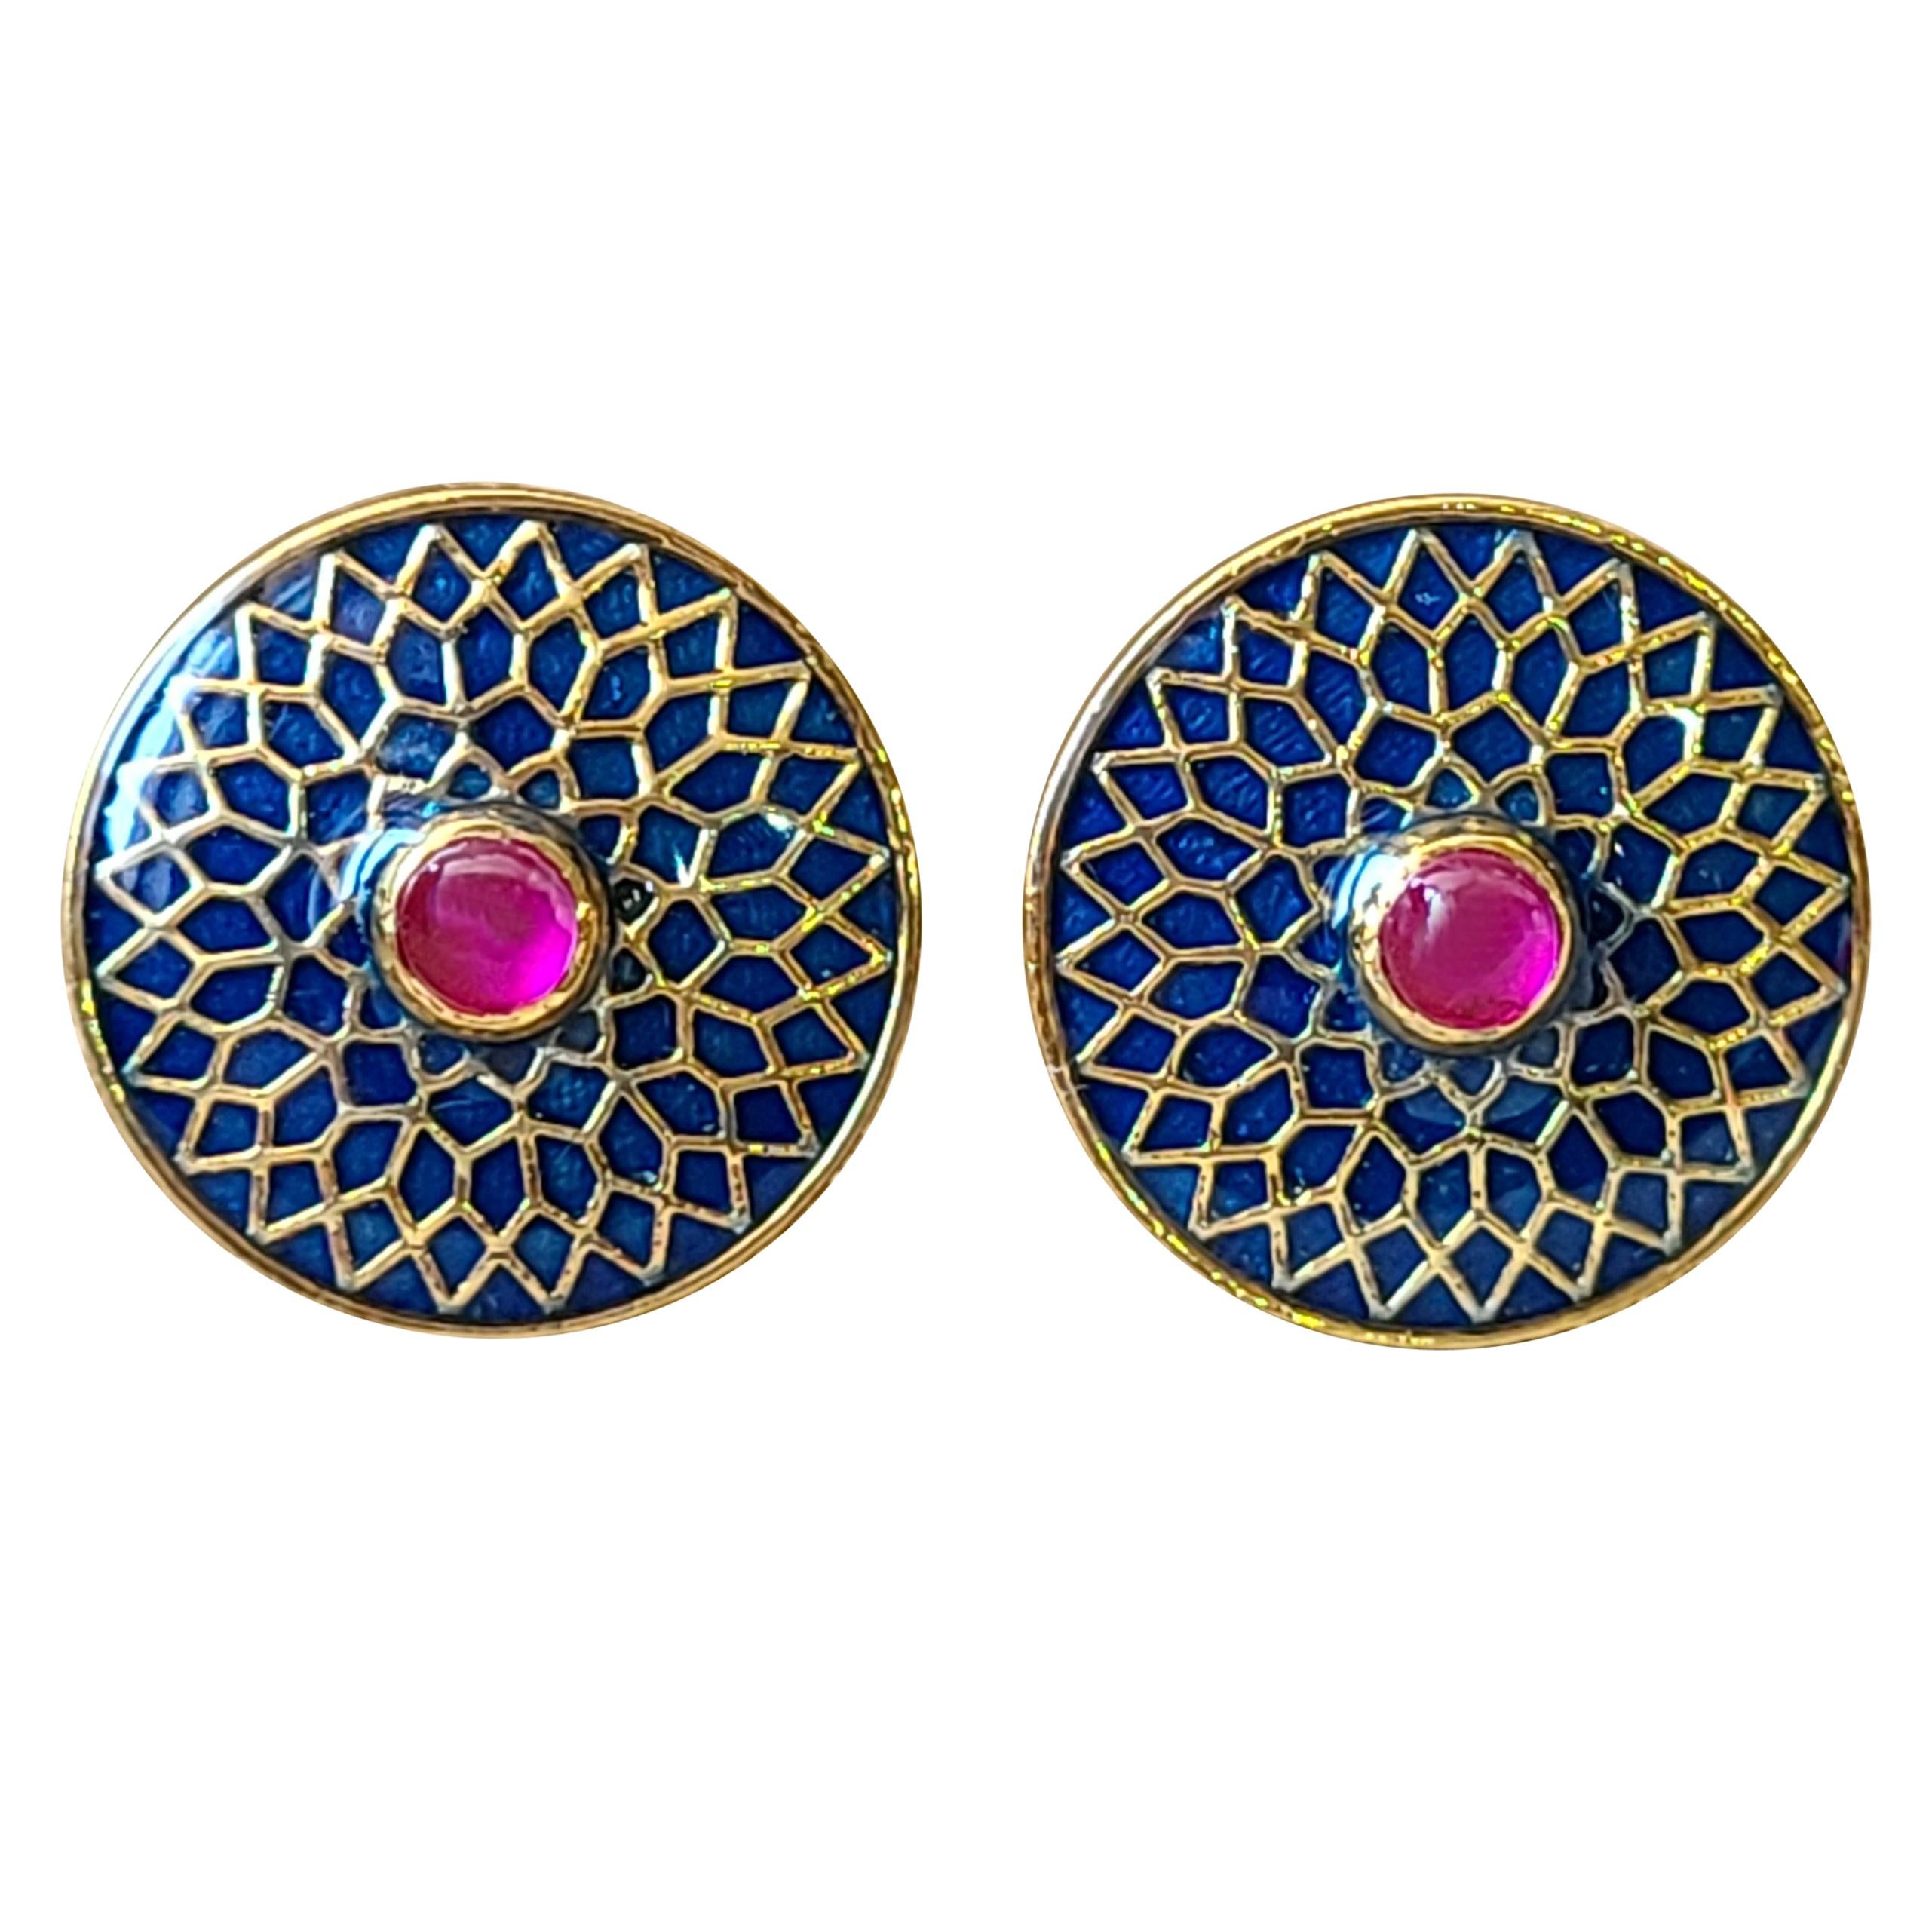 Blue and Gold Enamel Cufflinks with Ruby Set in 14 Karat Gold